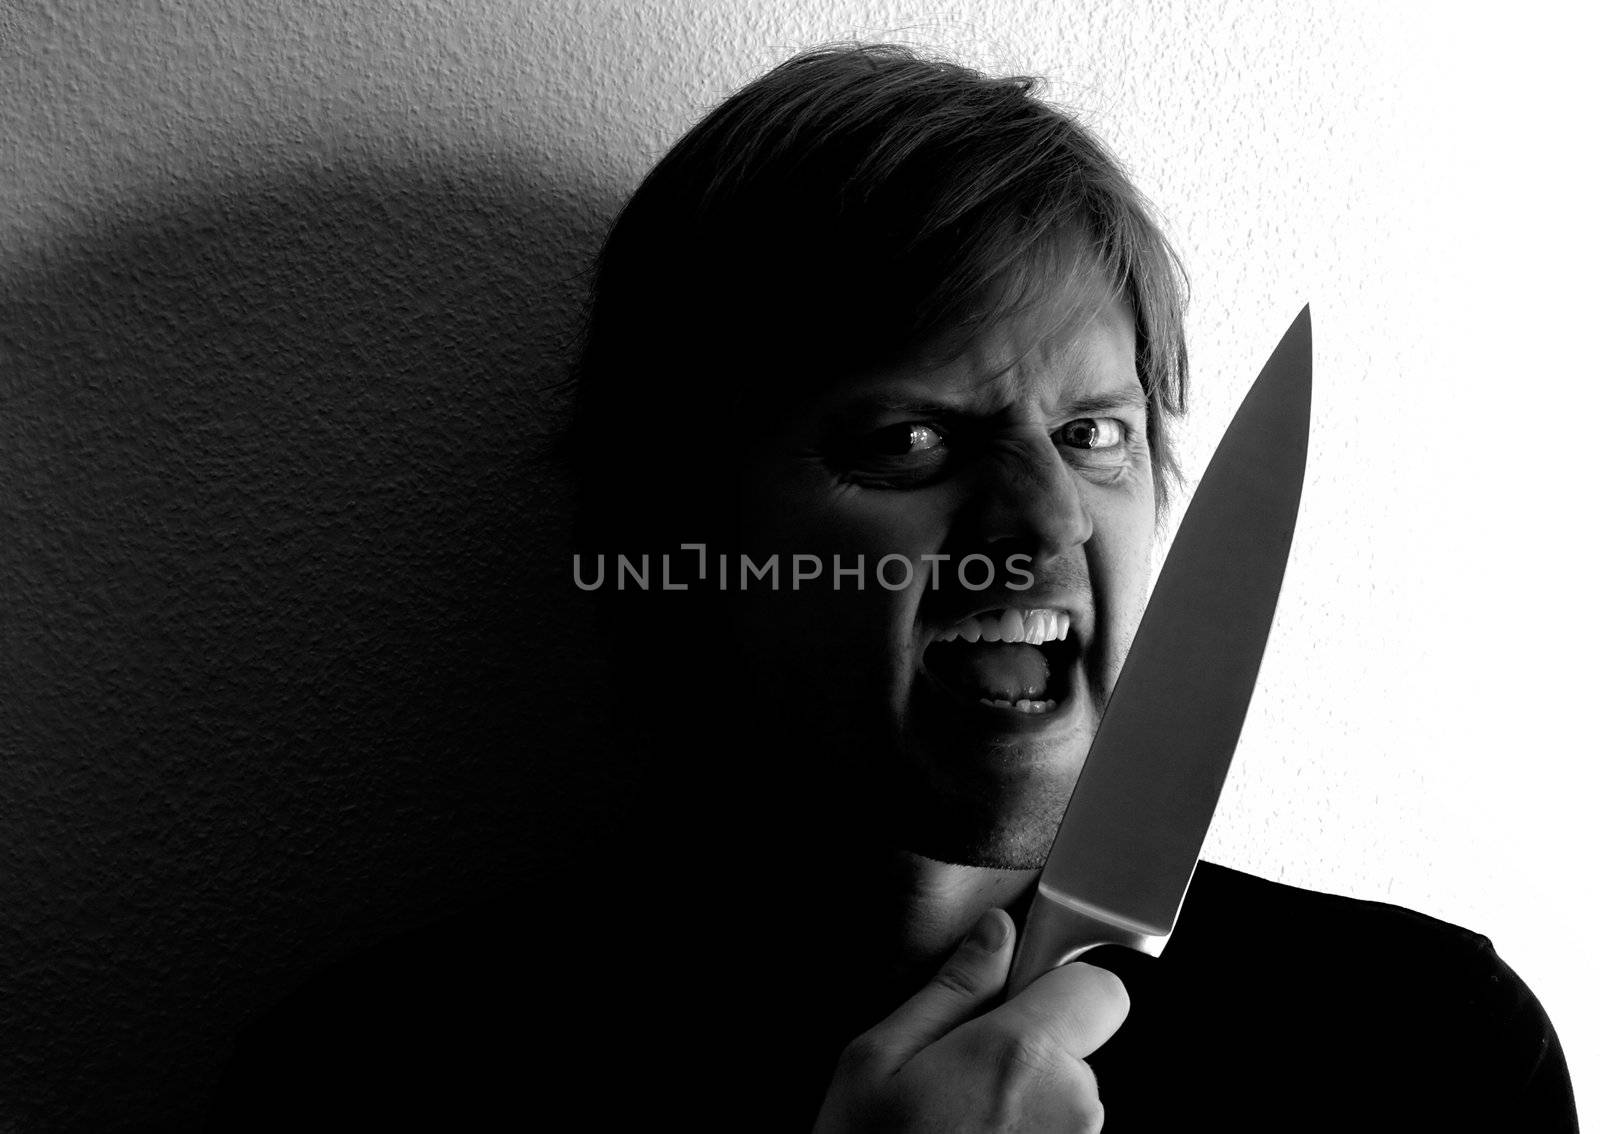 Crazy fellow wielding a knife.  Harsh lighting and shadows for more dramatic effect.
